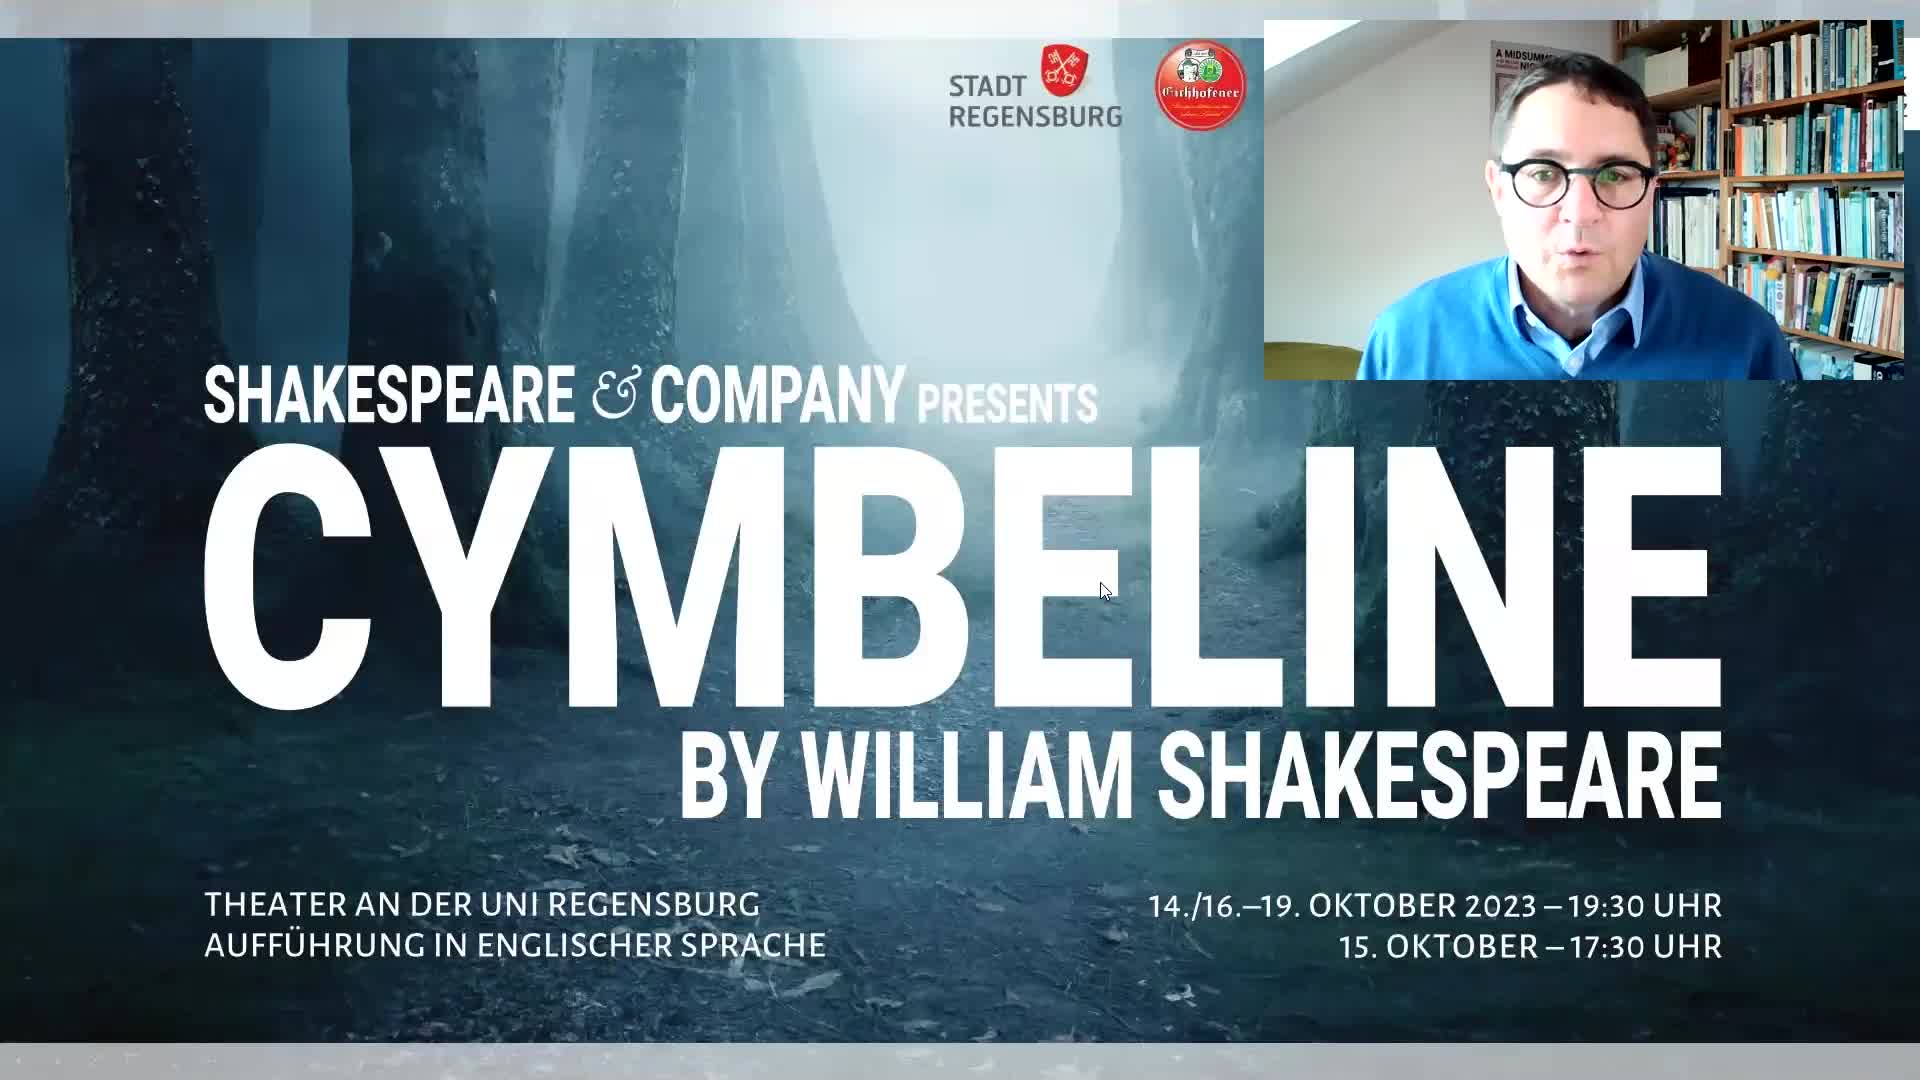 Introduction to William Shakespeare's Cymbeline